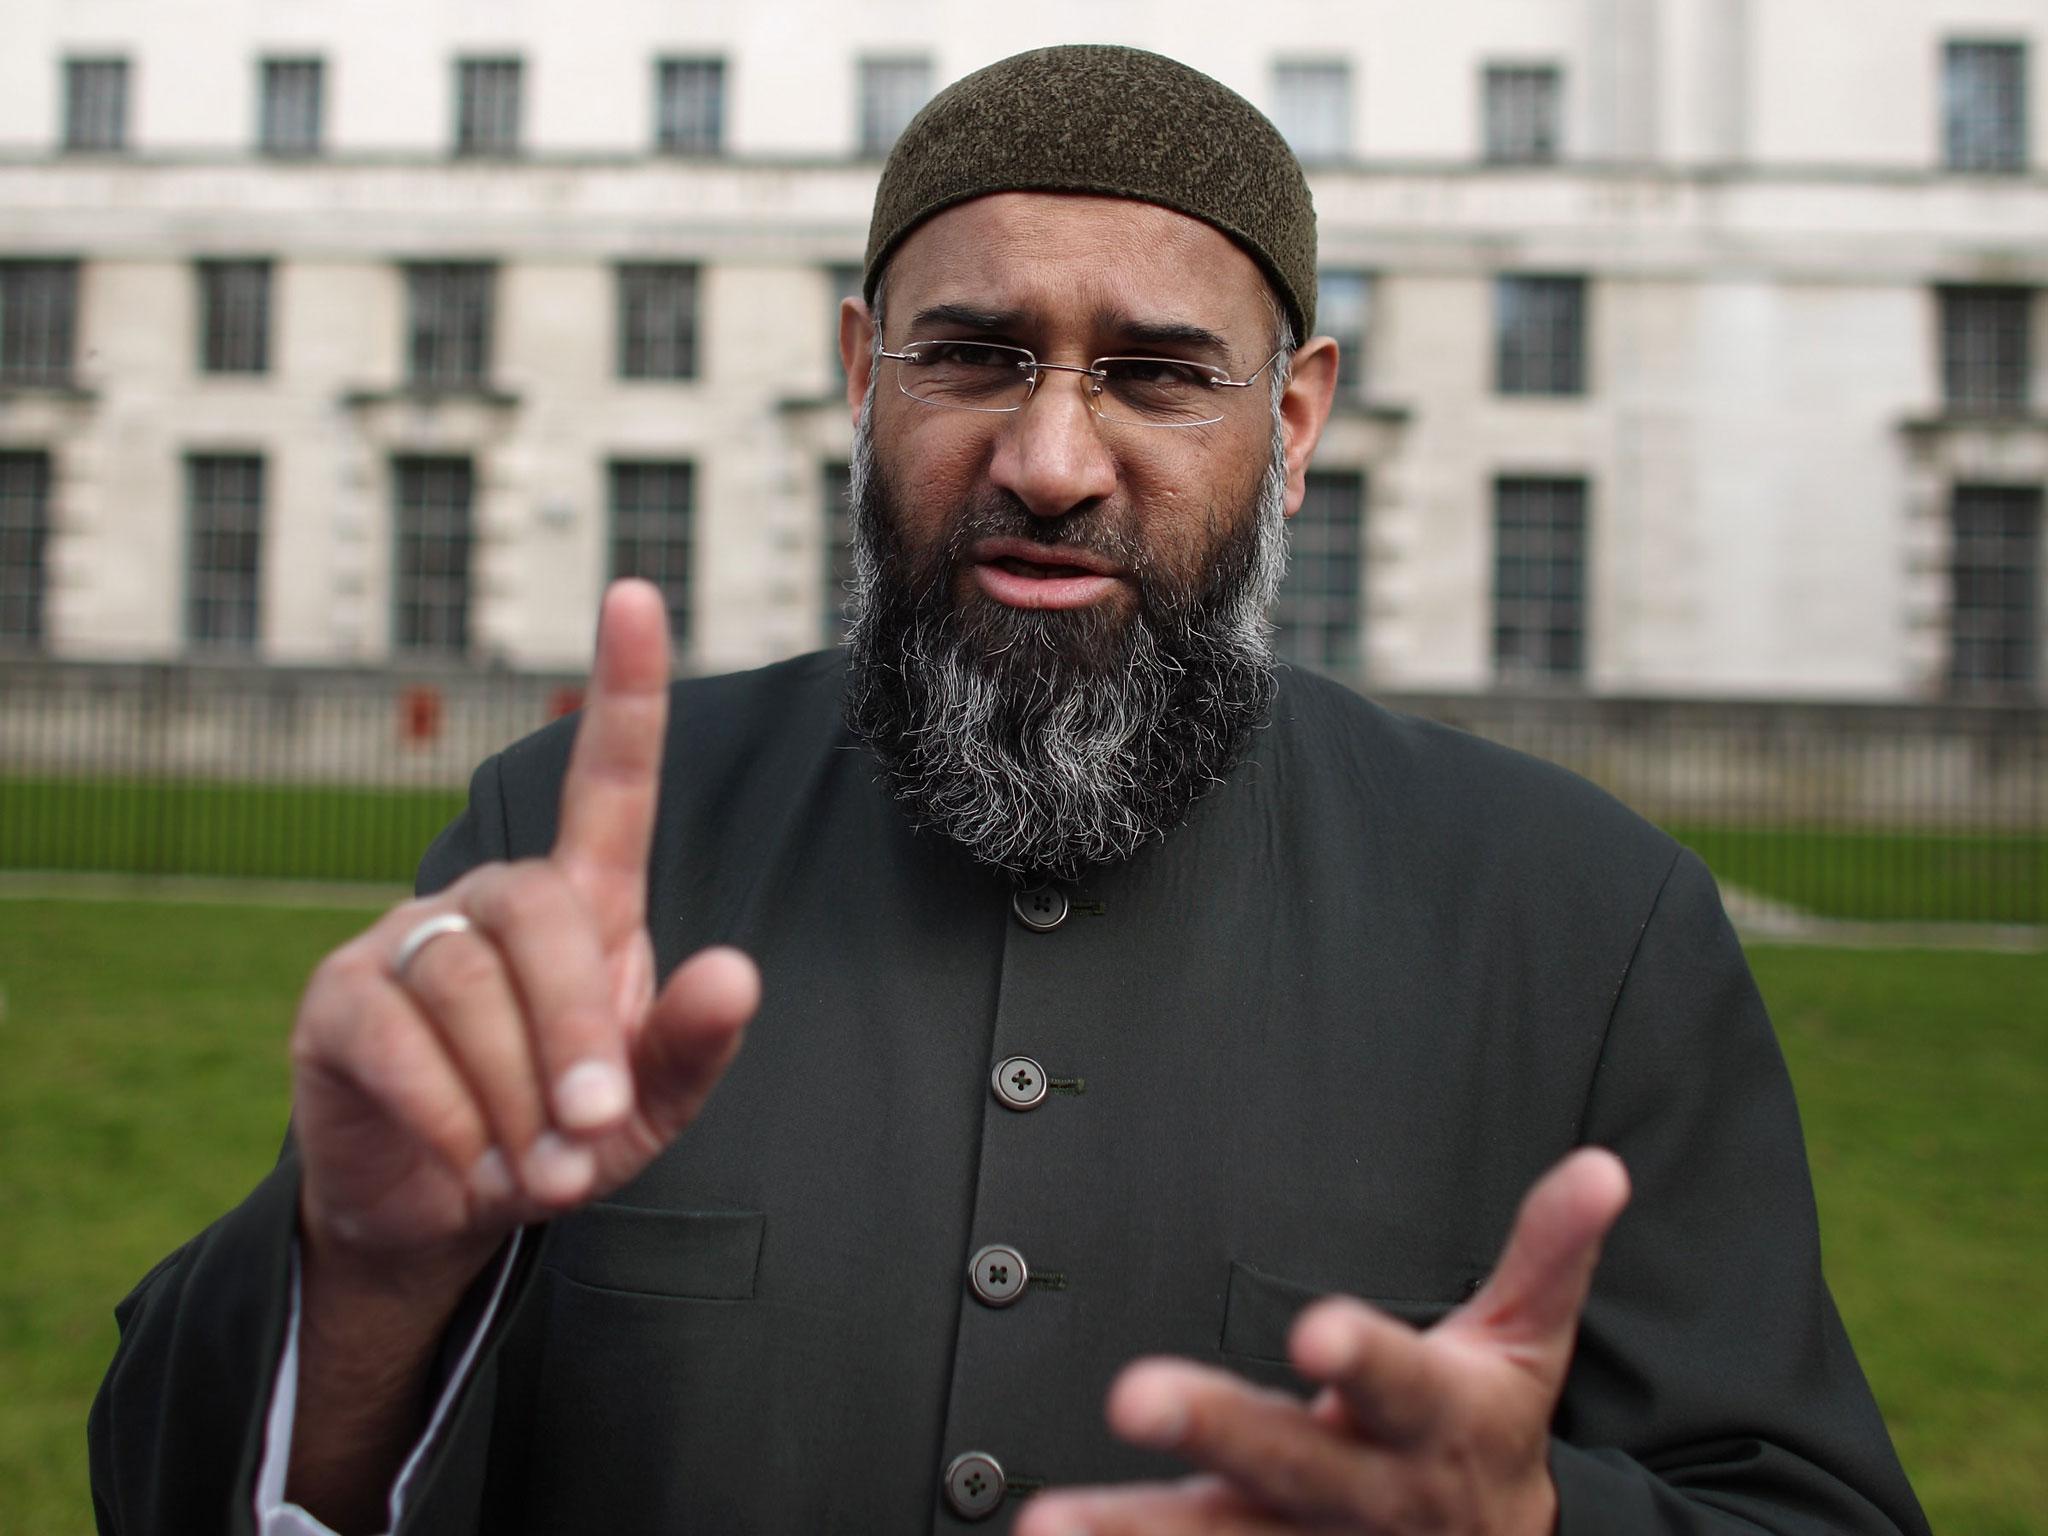 Anjem Choudary says he knew the suspect Michael Adebolajo 